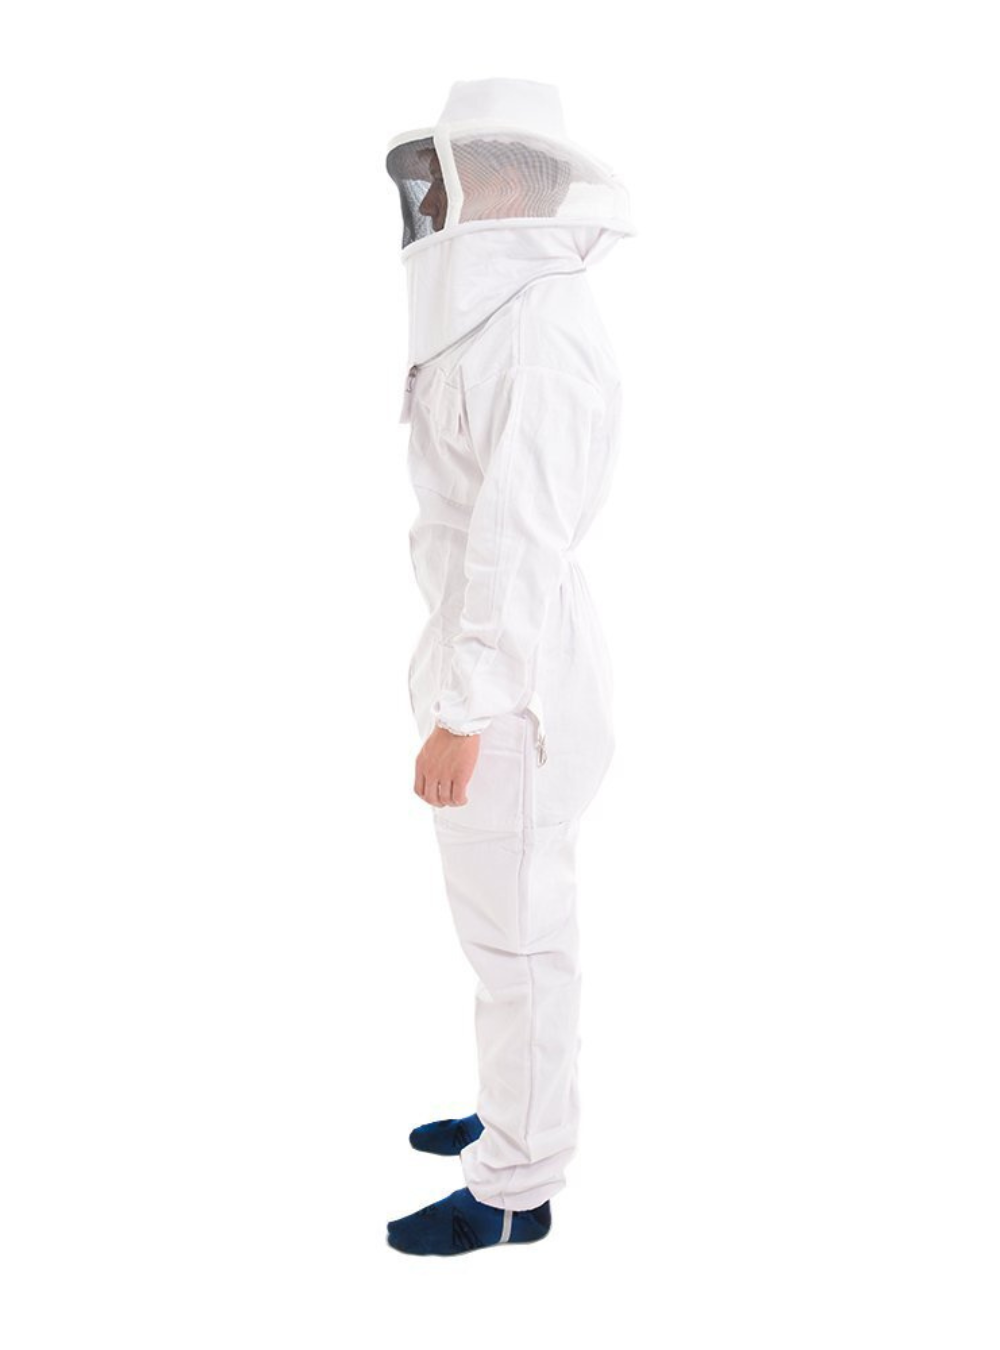 A side view of Double Upper Pocket Beekeeper Suit-Cotton Front equipped with Fencing veil, elastics cuffs and light weighted breathable cotton fabric.